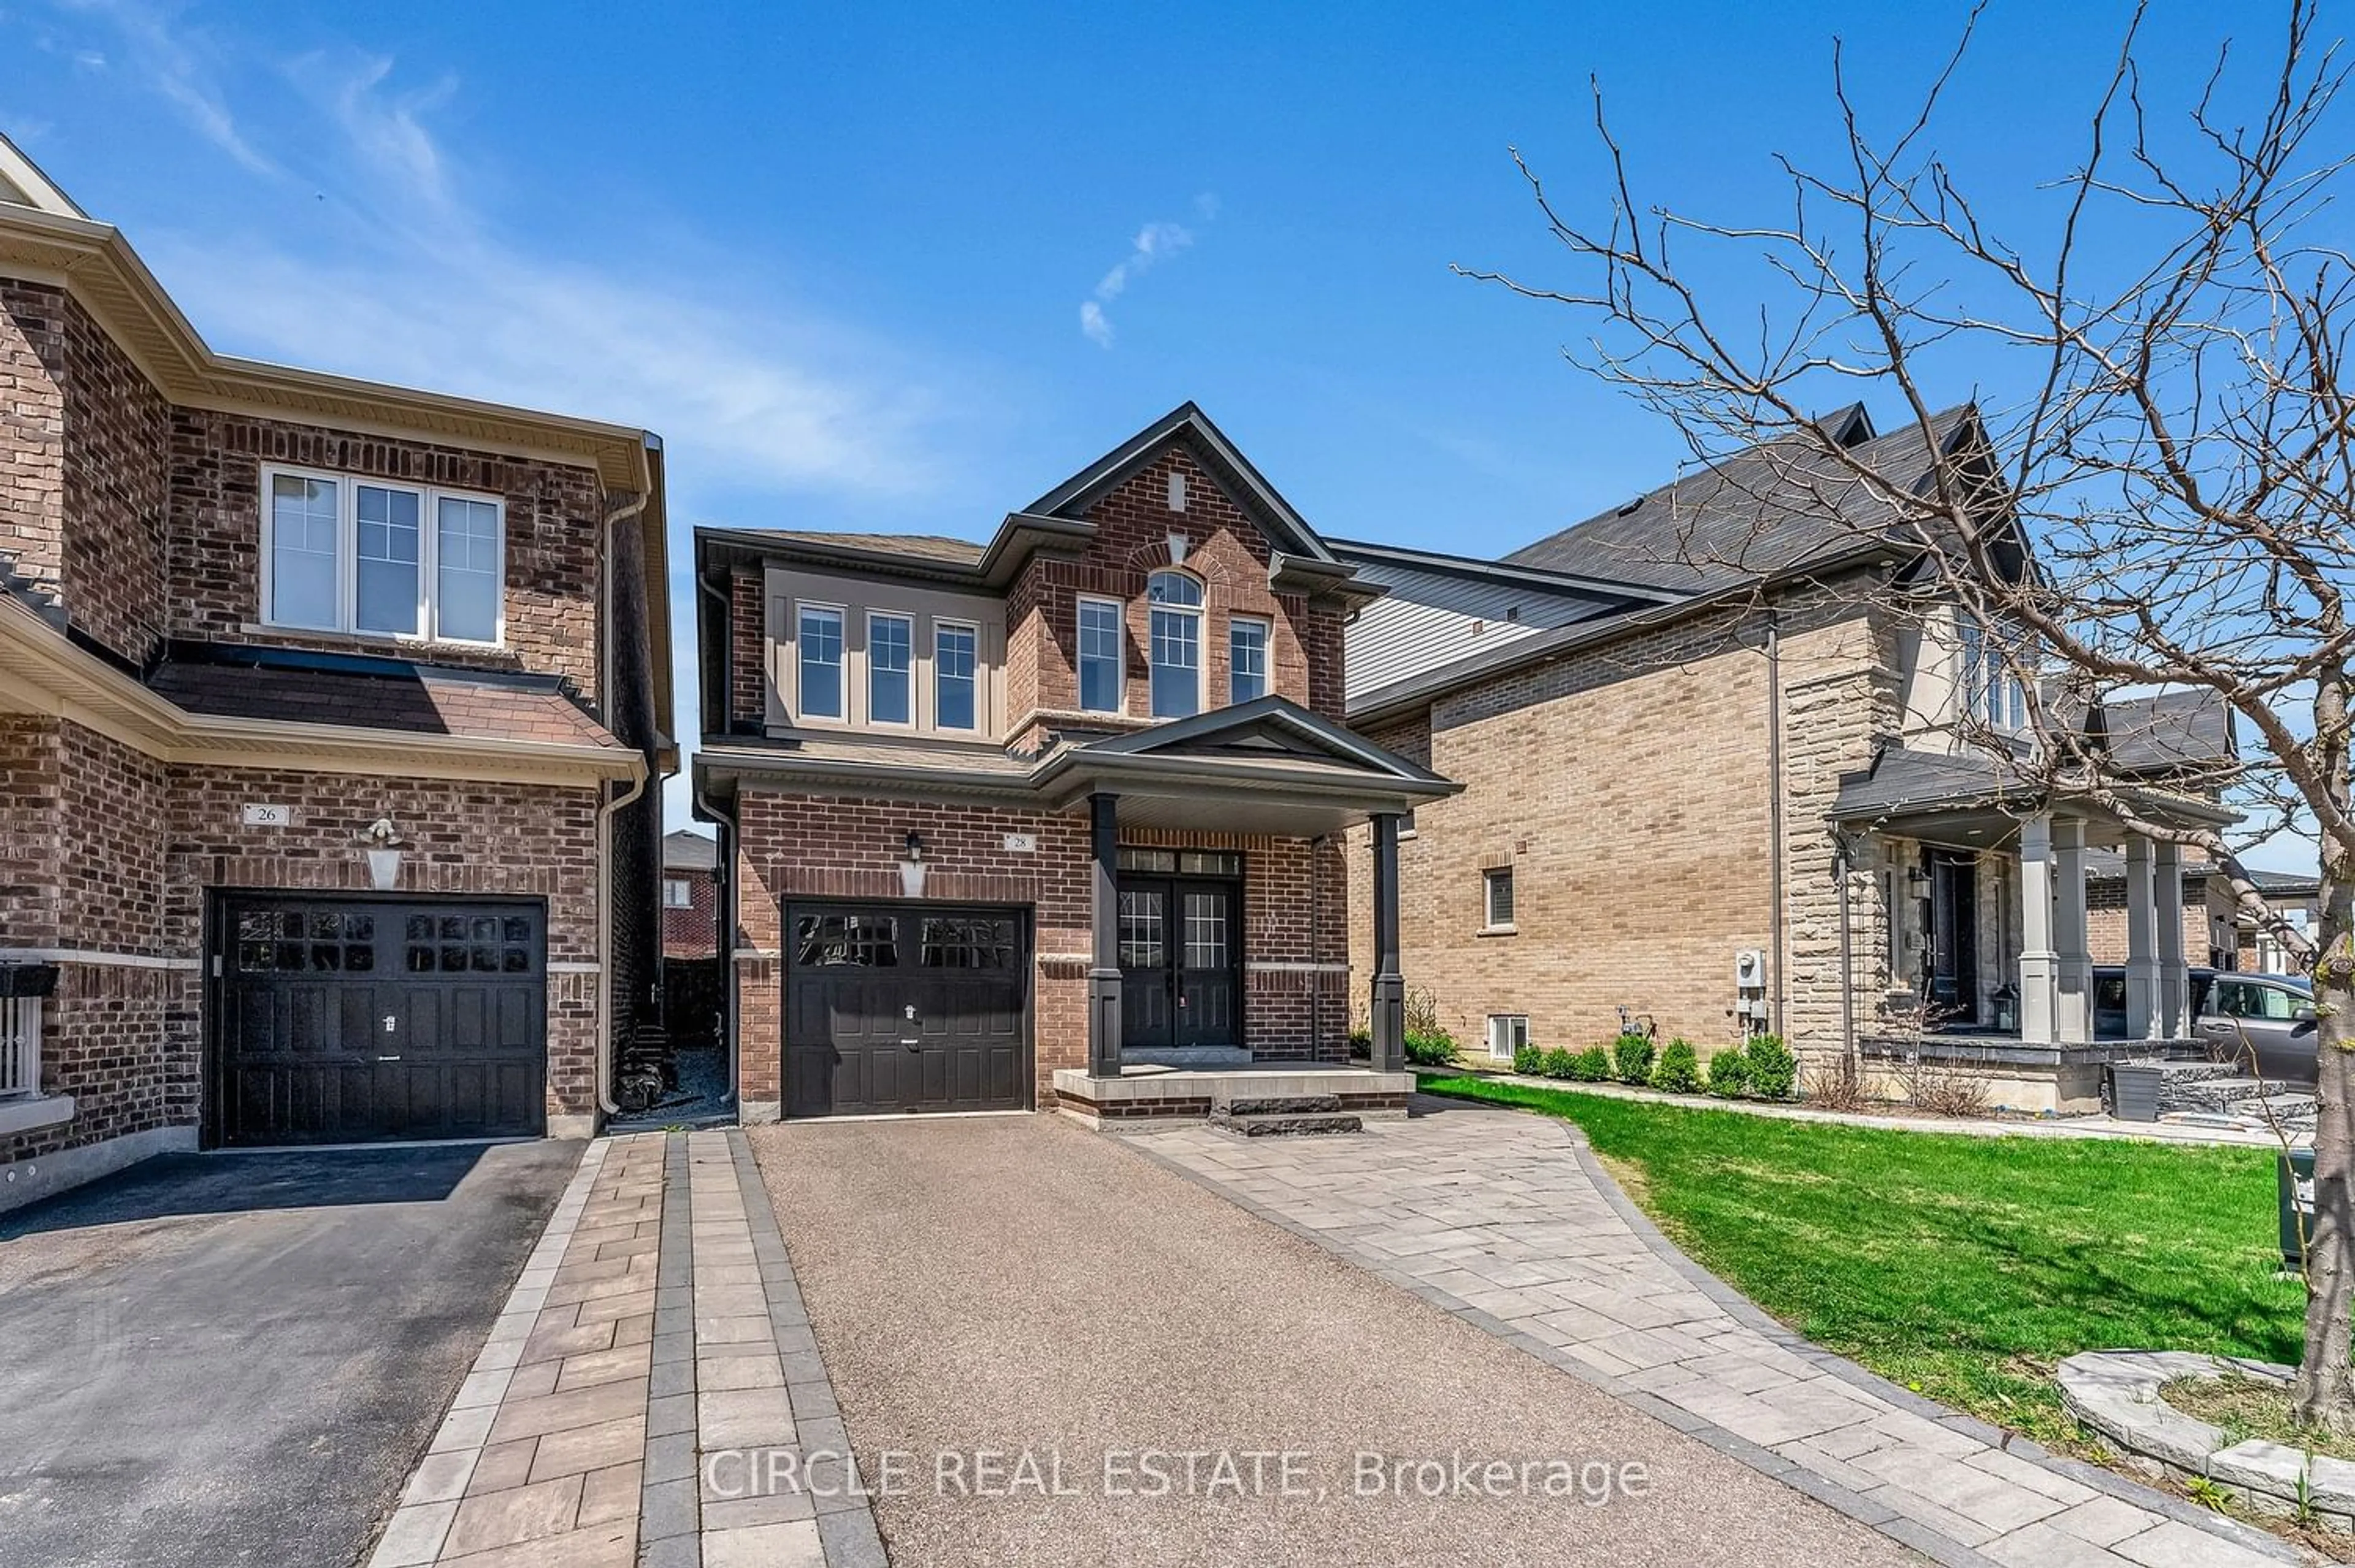 Home with brick exterior material for 28 Avening Dr, Vaughan Ontario L4H 3Y4